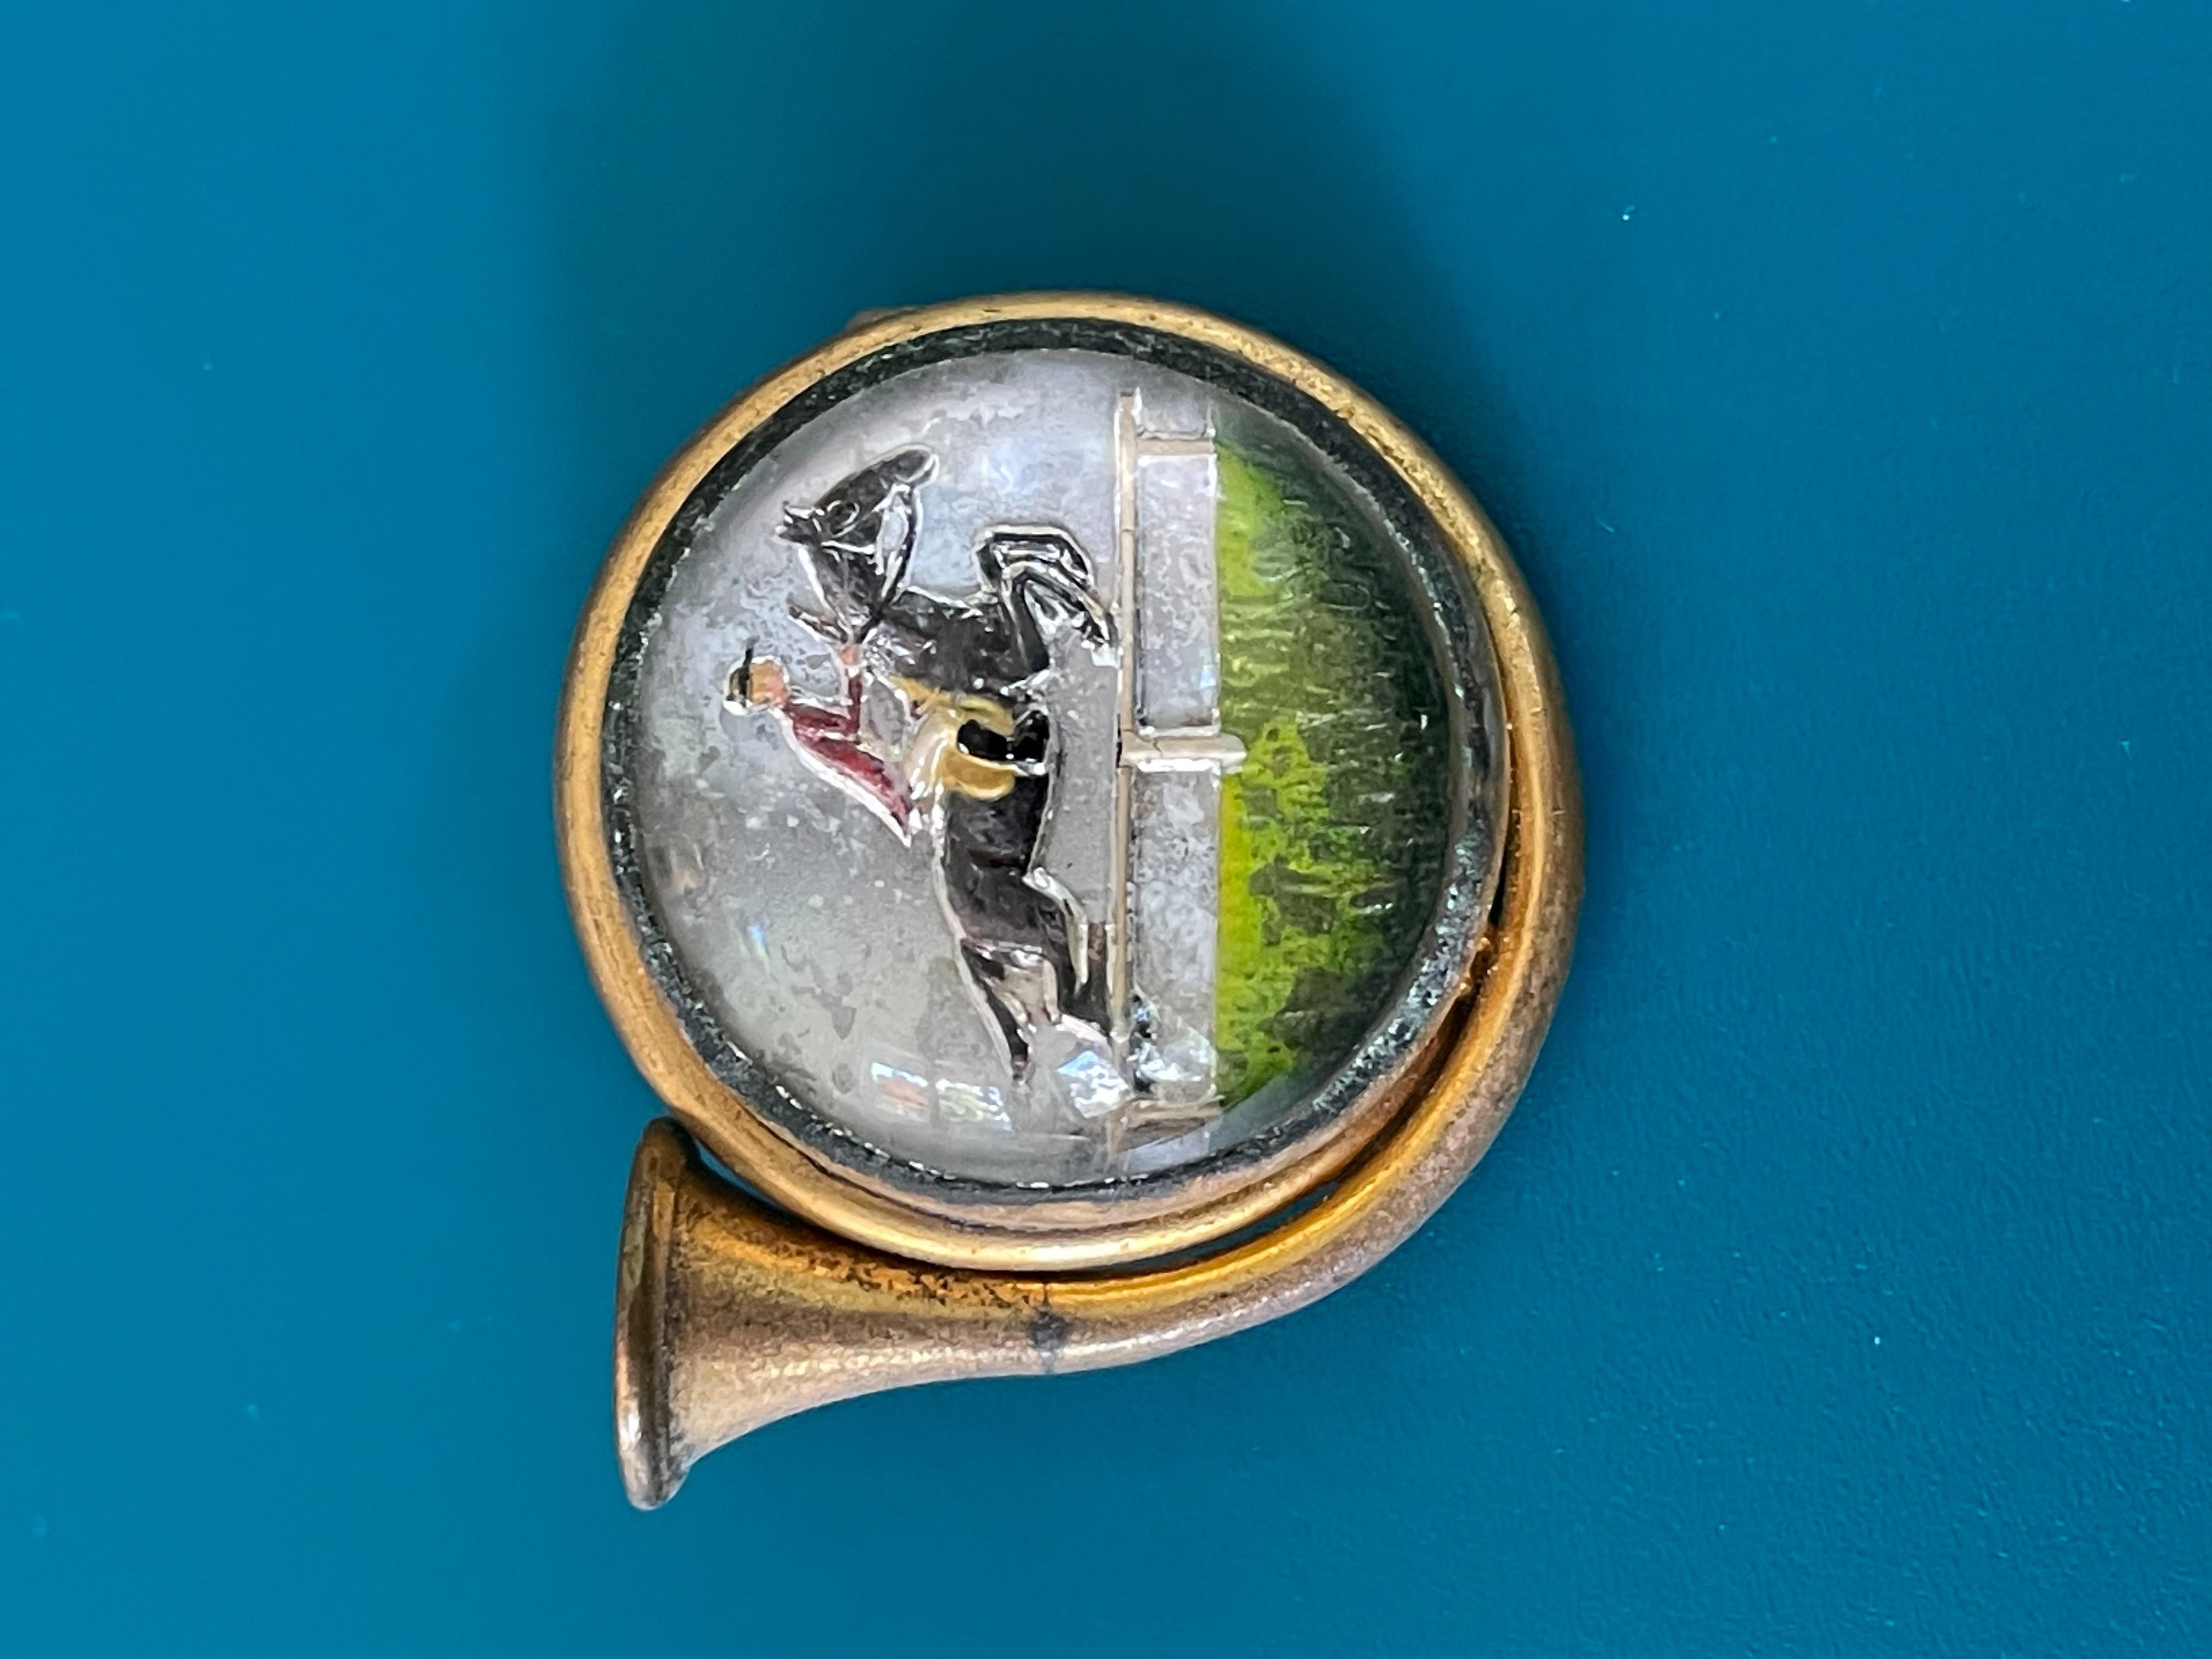 Vintage French Horn Reverse Painted Essex Crystal Brooch Pin with Horse, Rider For Sale 1